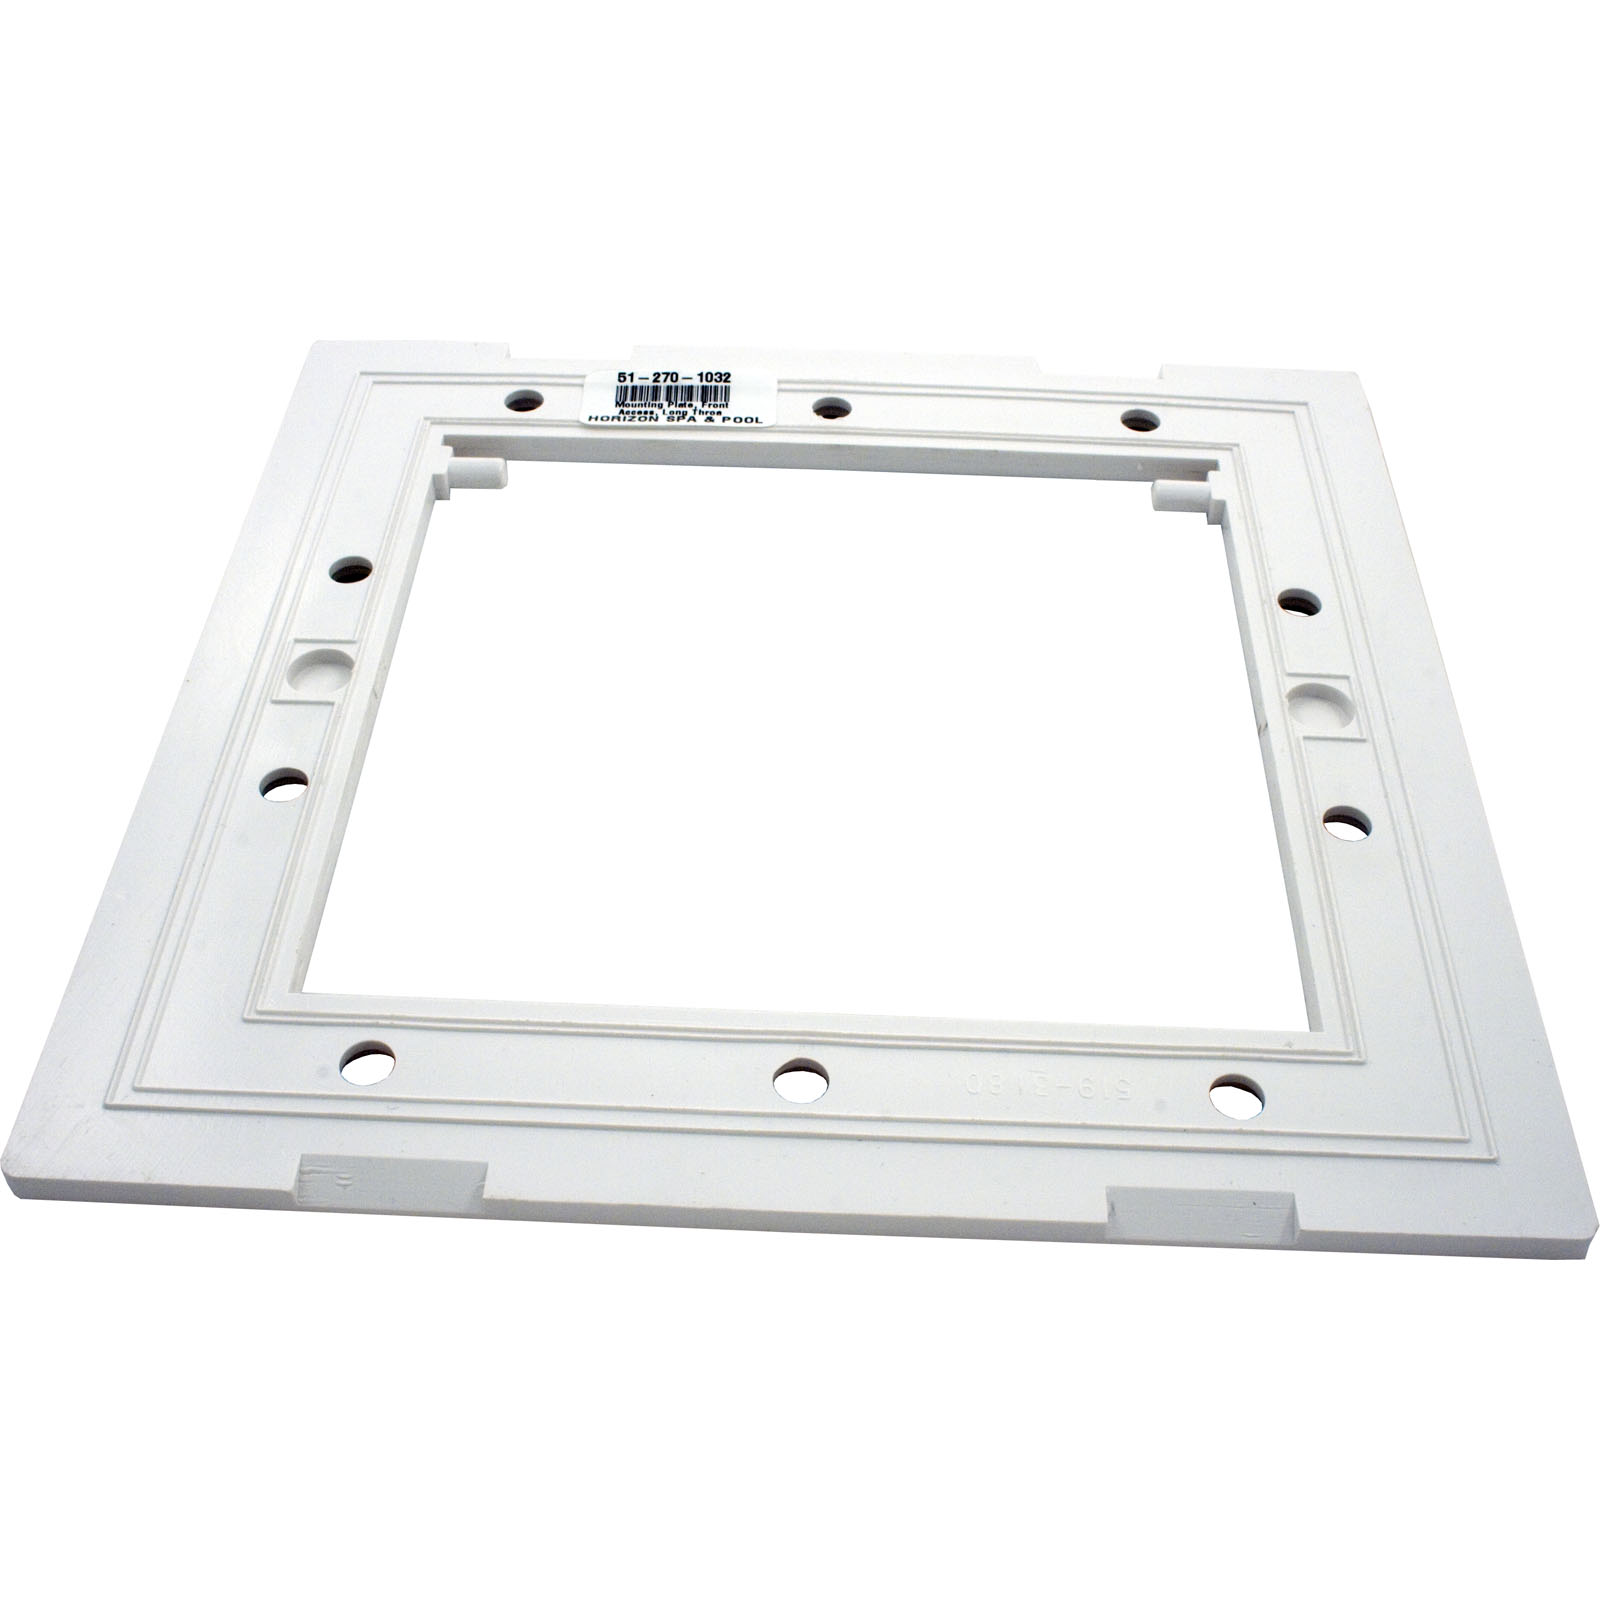 SKIMMER FACEPLATE, WATERWAY FLOPRO, FRONT ACCESS, LONG,WHITE | 519-3180